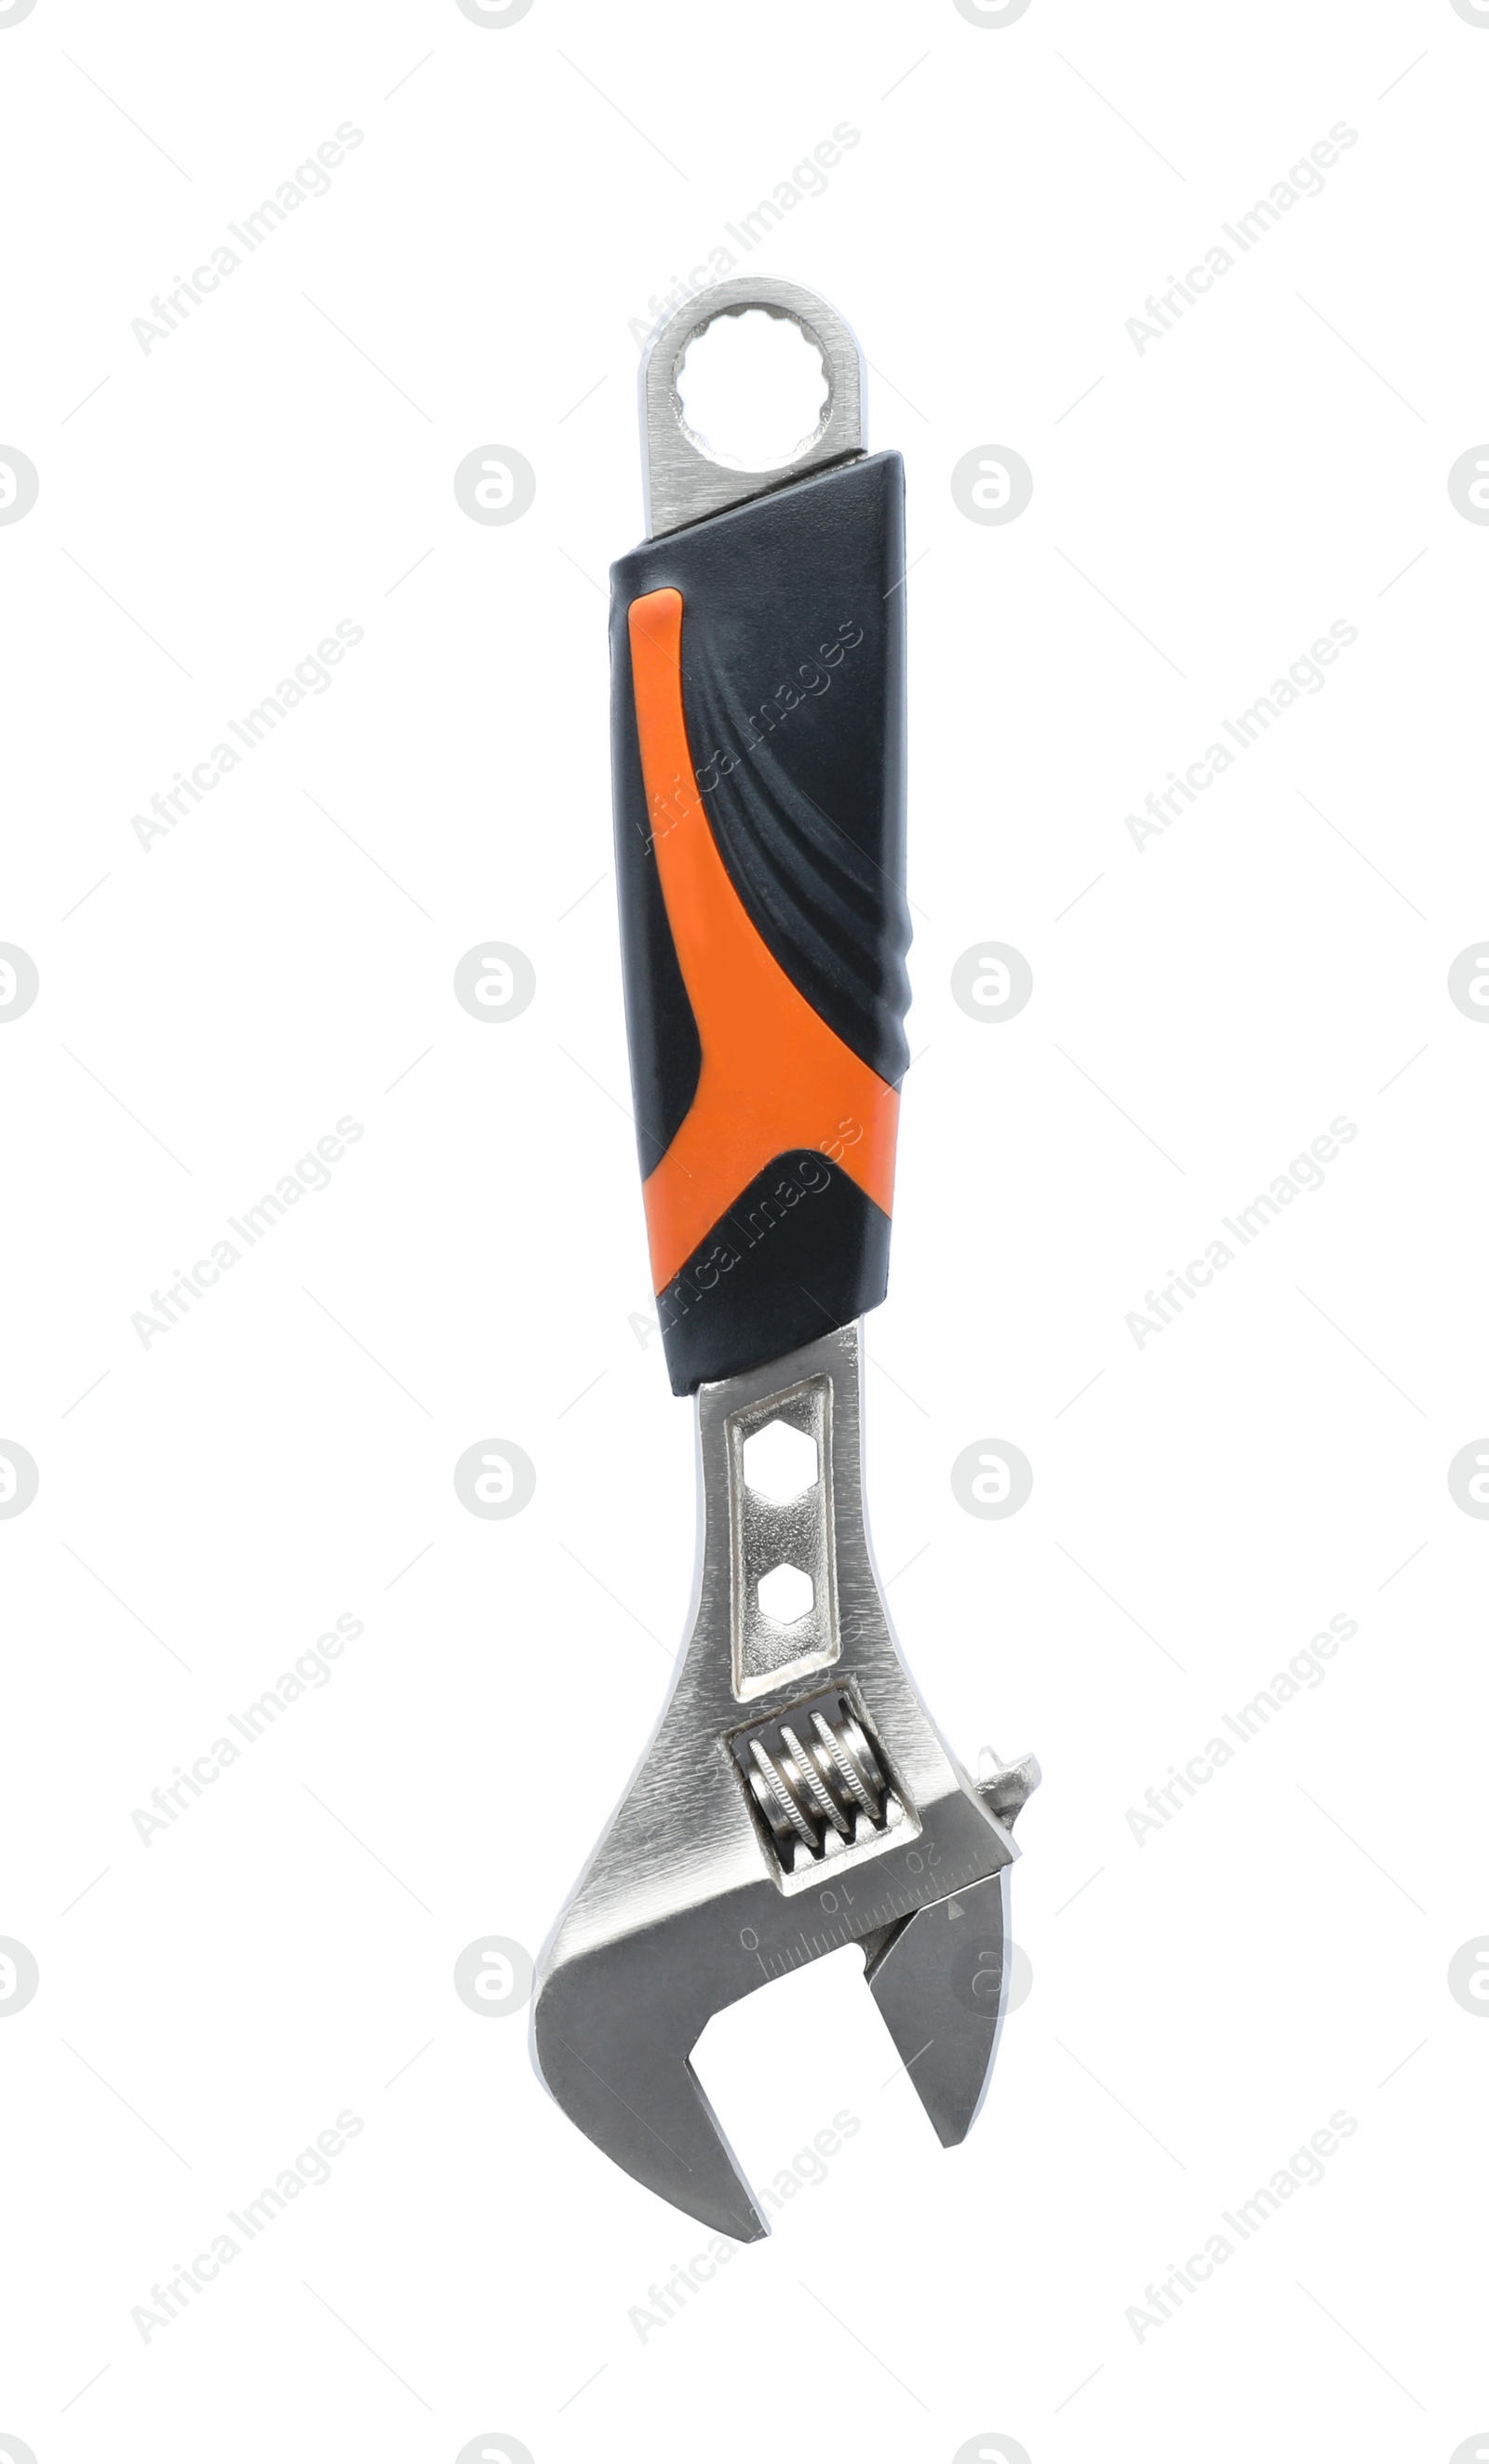 Photo of Adjustable wrench on white background, top view. Plumber tools